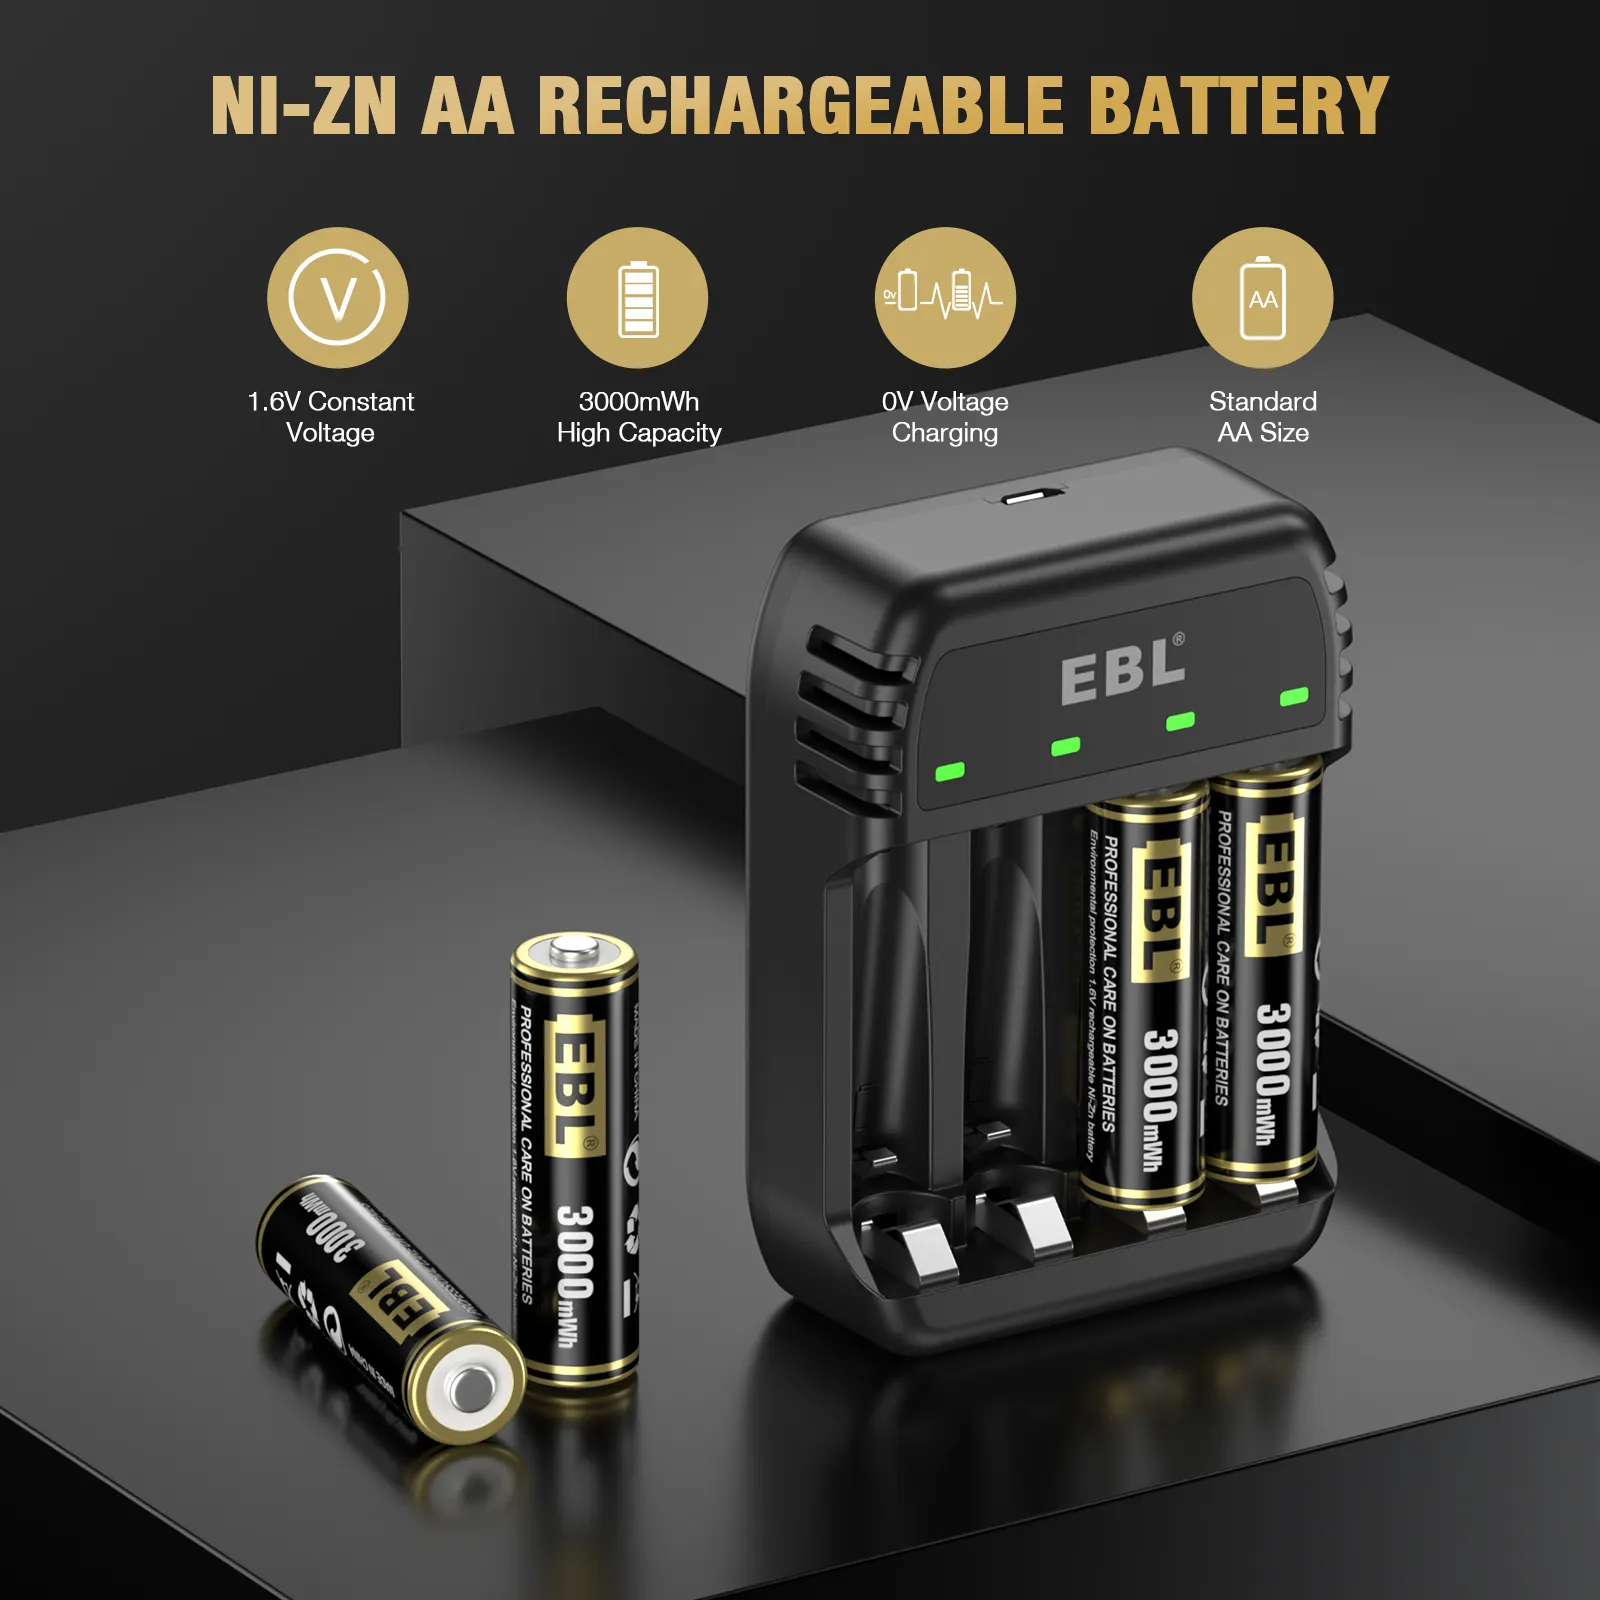 Batteries AA rechargeables EBL 4 Pack 1.6V Double A Ni-Zn 3000mWh avec chargeur de batterie Ni Zn/Ni MH AAA à 4 baies